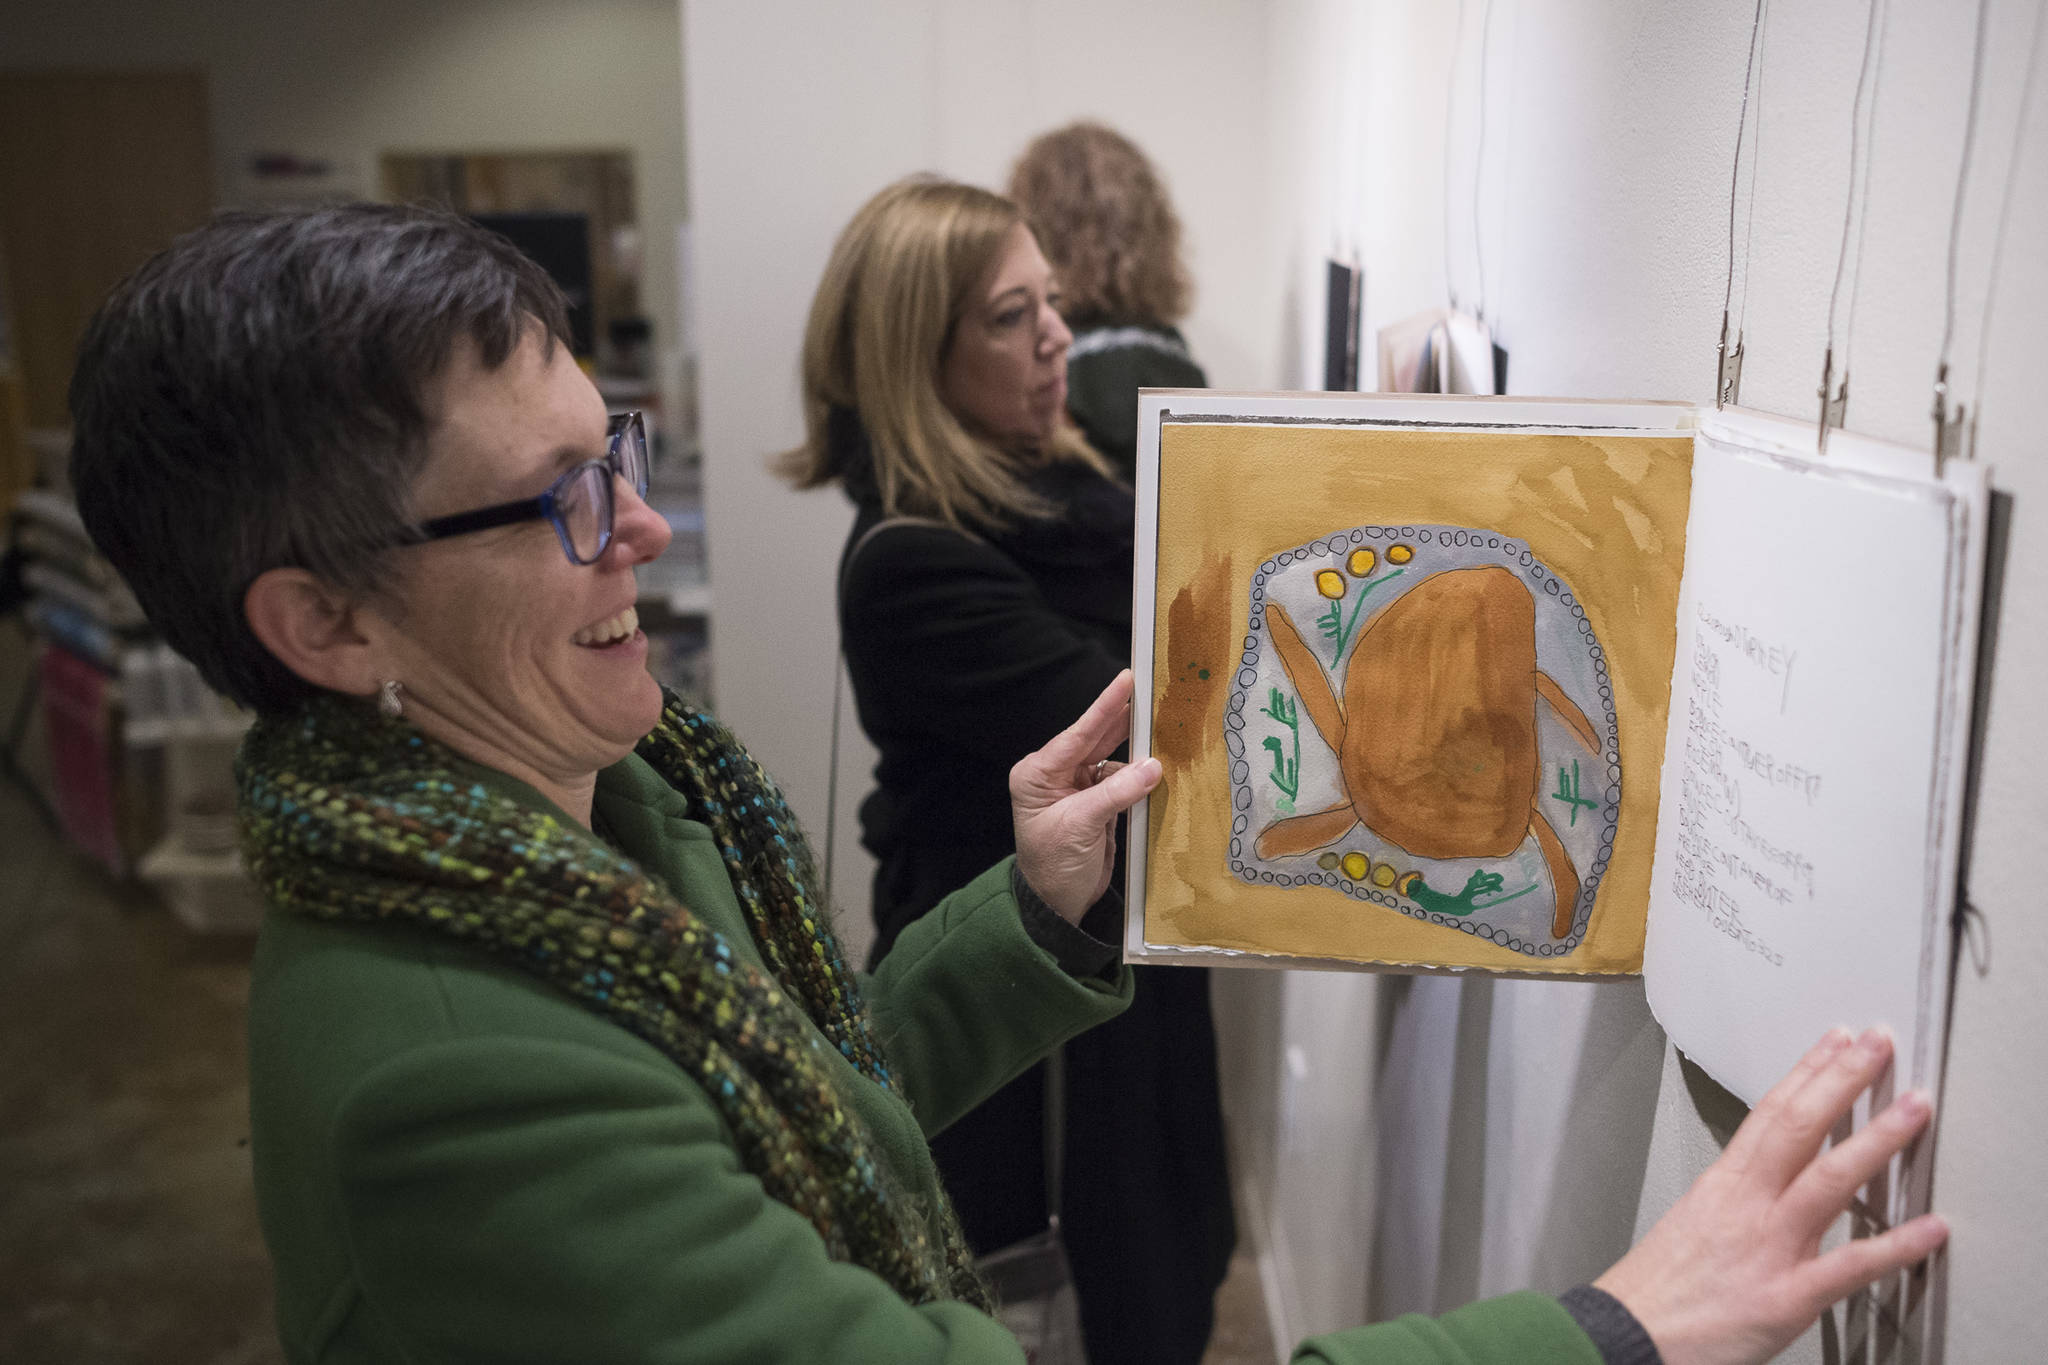 Kim Champney views new works featuring The Canvas artists’ Sketchbook Show during Gallery Walk on Friday, Dec. 7, 2018. (Michael Penn | Juneau Empire)